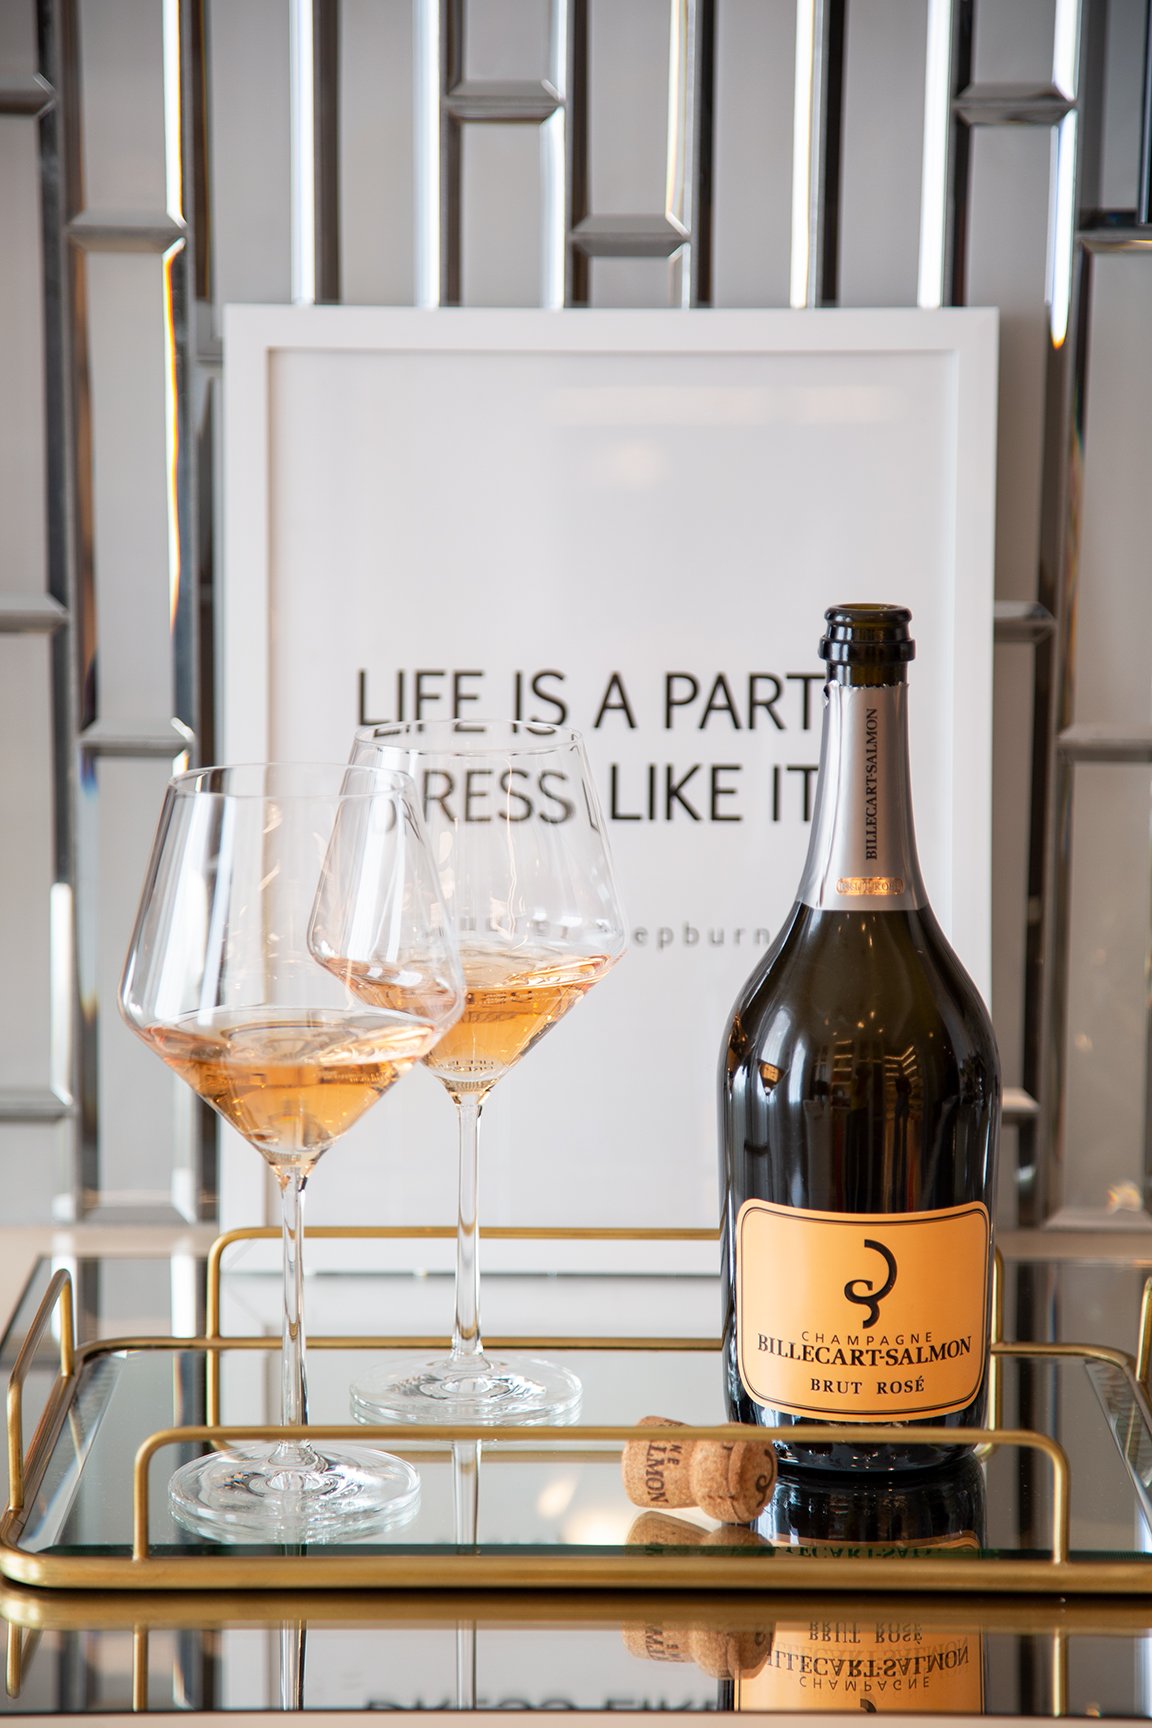 Champagne and Chanel Launch! — Customizable Squarespace